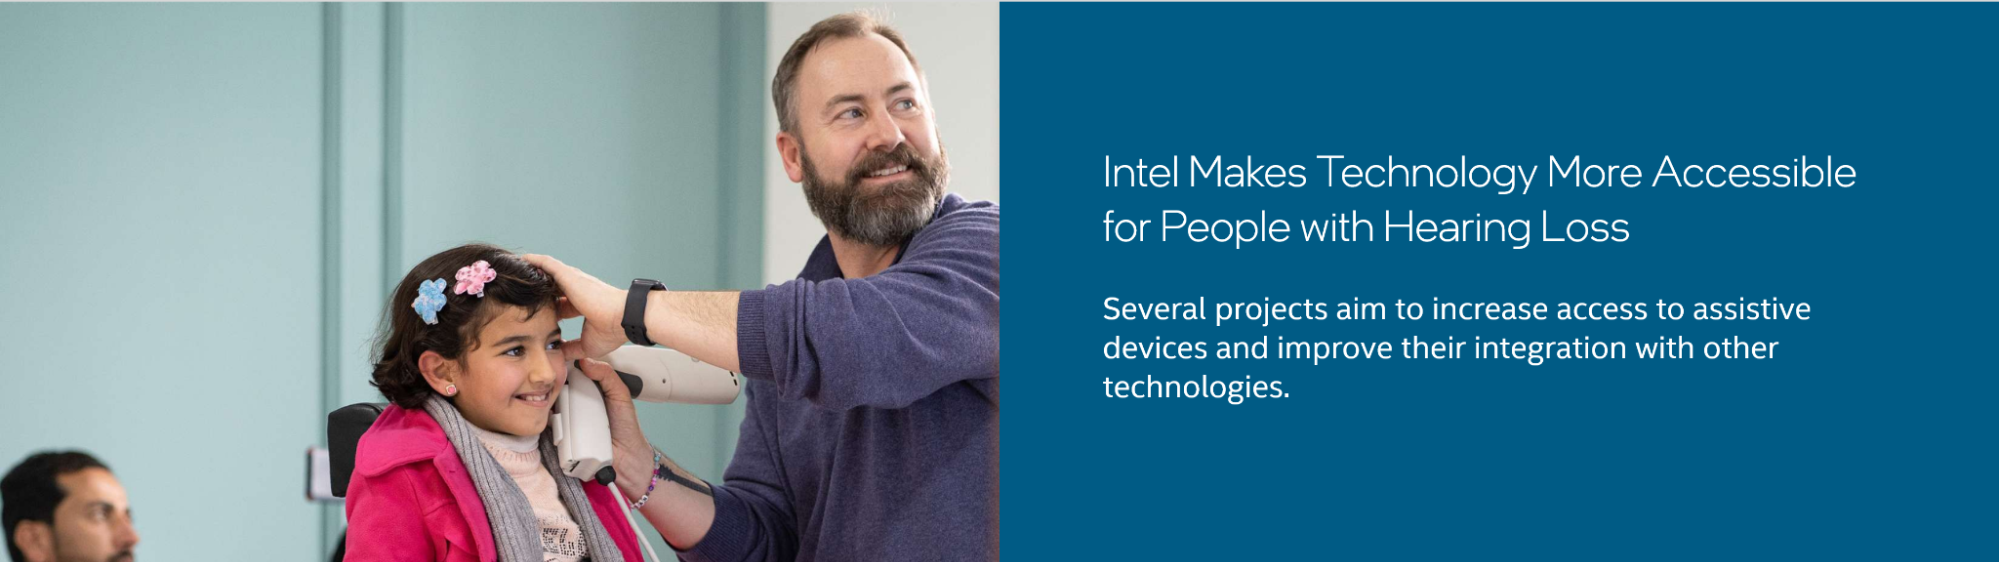 Figure 4. A man with a beard holds a device up to a little girl's ear, both smiling and focusing on something out of frame. The headline reads "Intel Makes Technology More Accessible for People with Hearing Loss." Then in smaller text "Several projects aim to increase access to assistive devices and improve integration with other technologies."